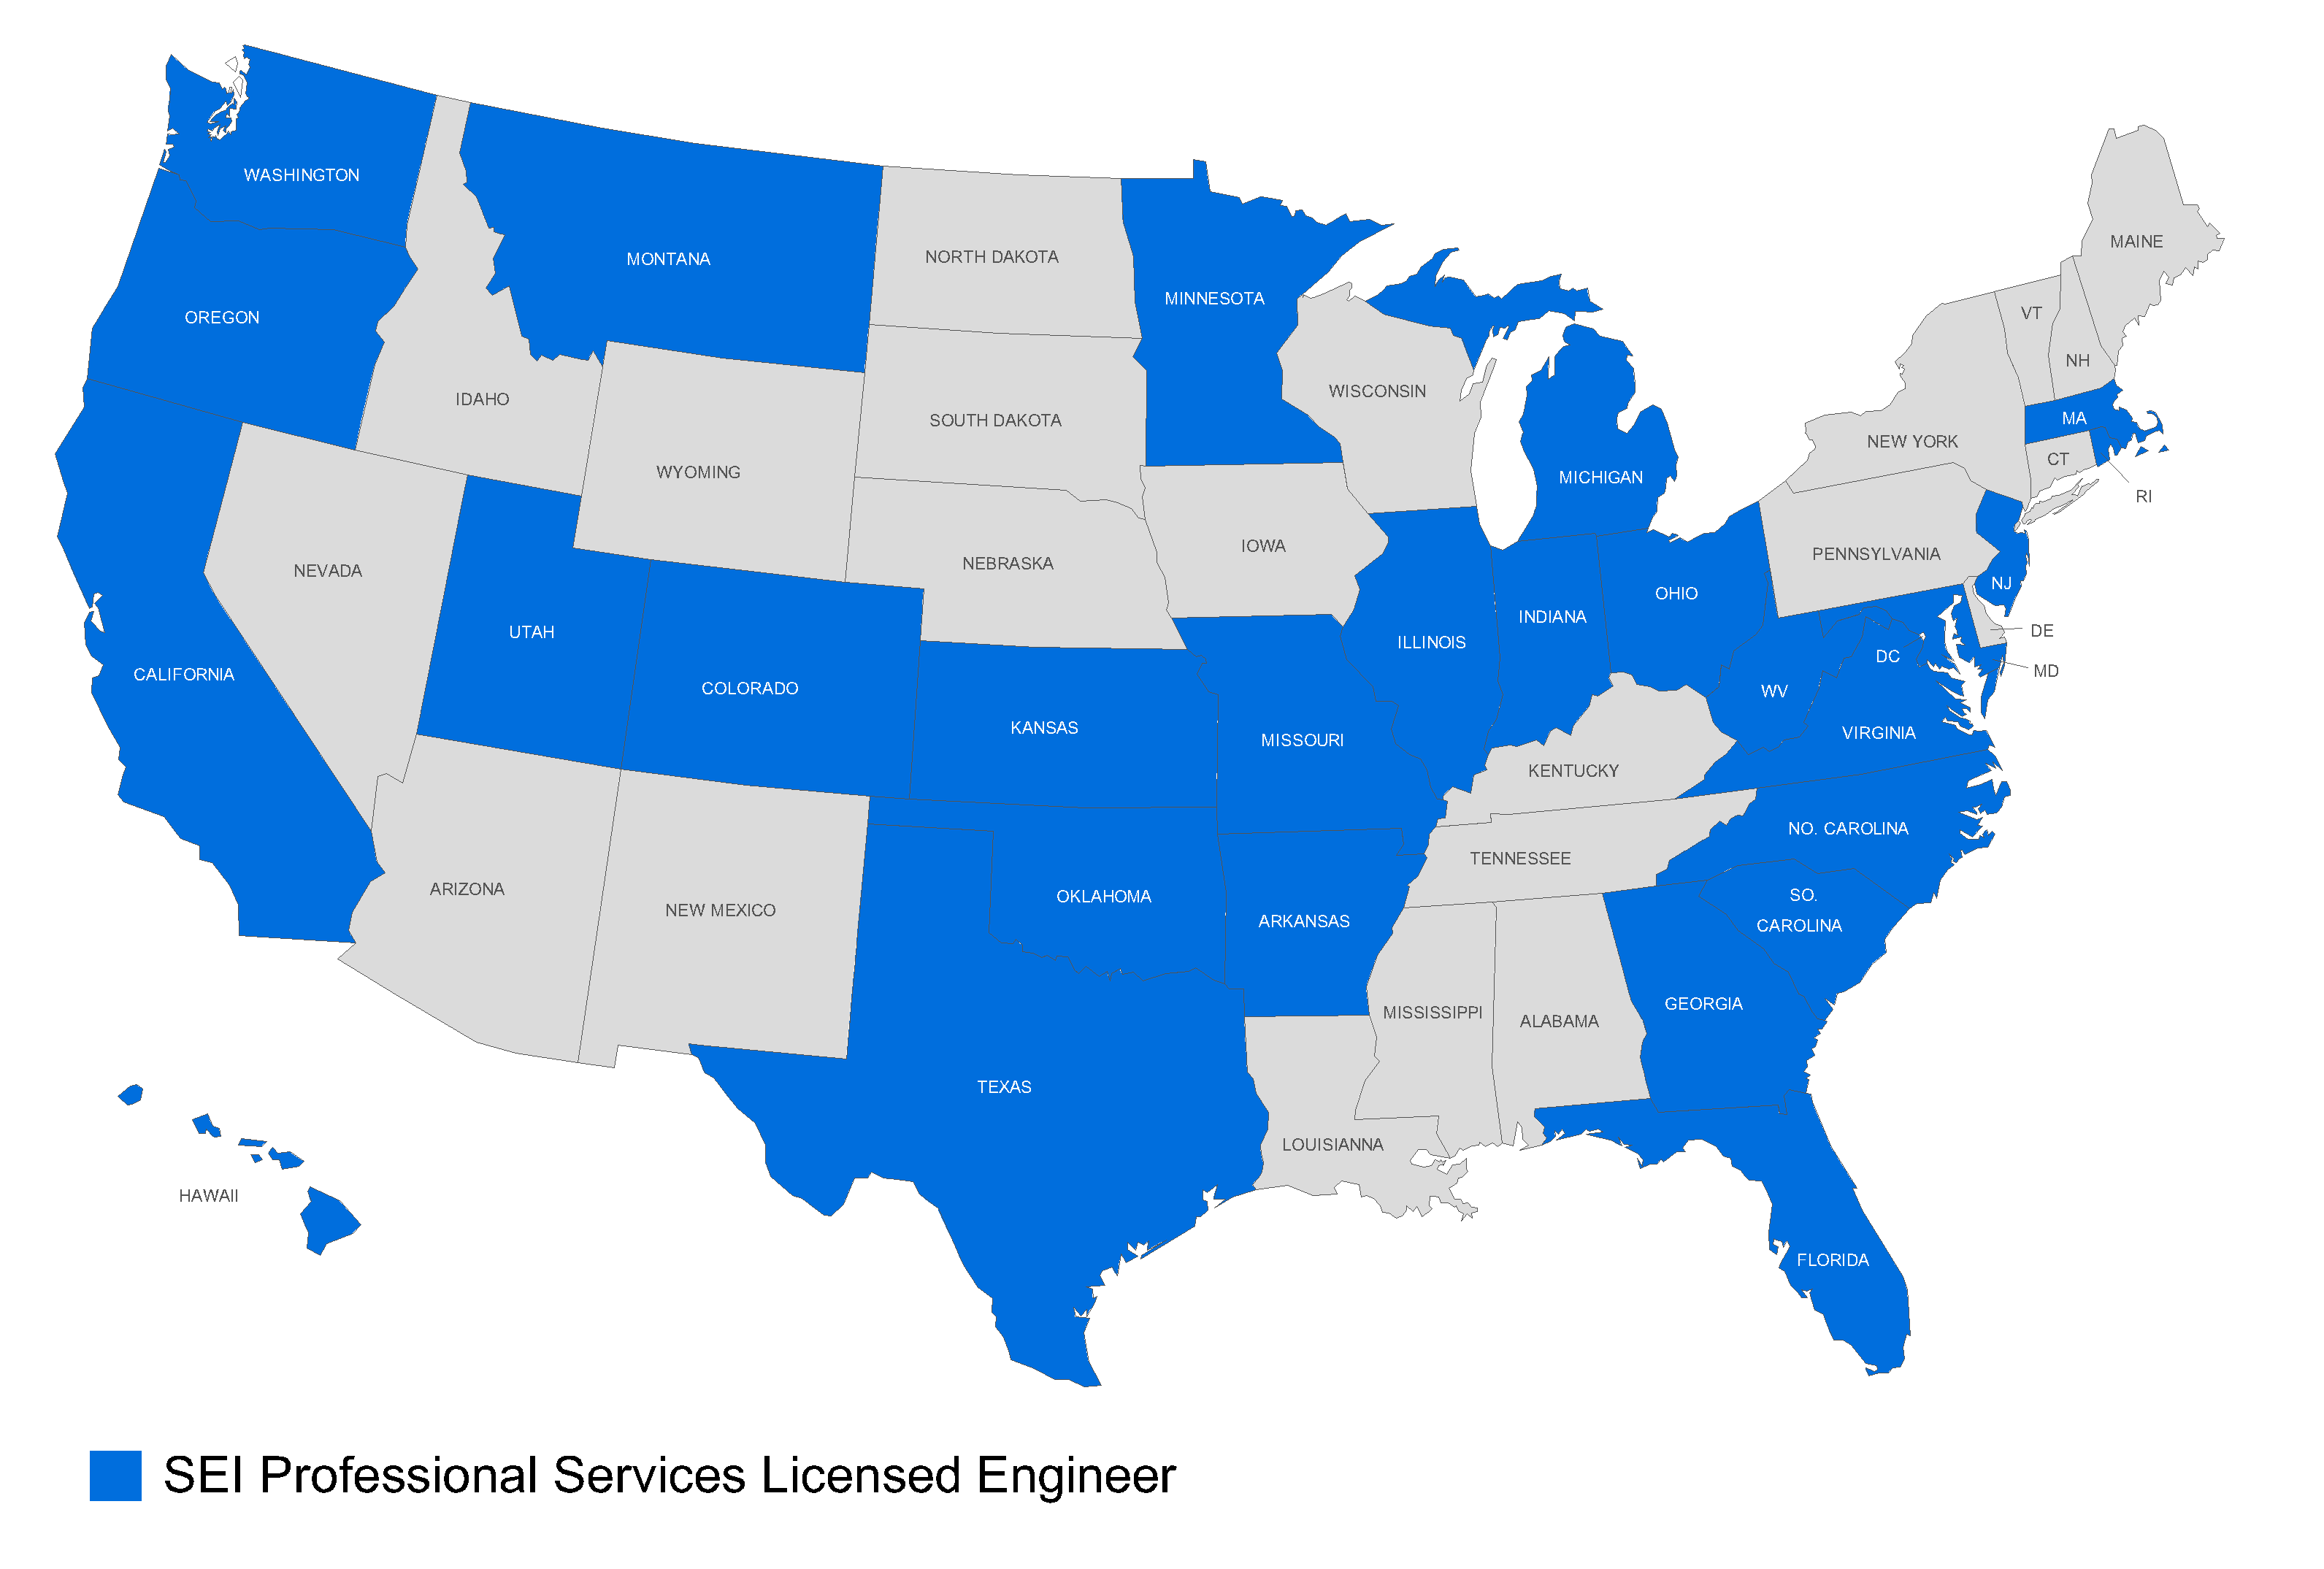 Map showing states in the United States where SEI Engineering is licensed